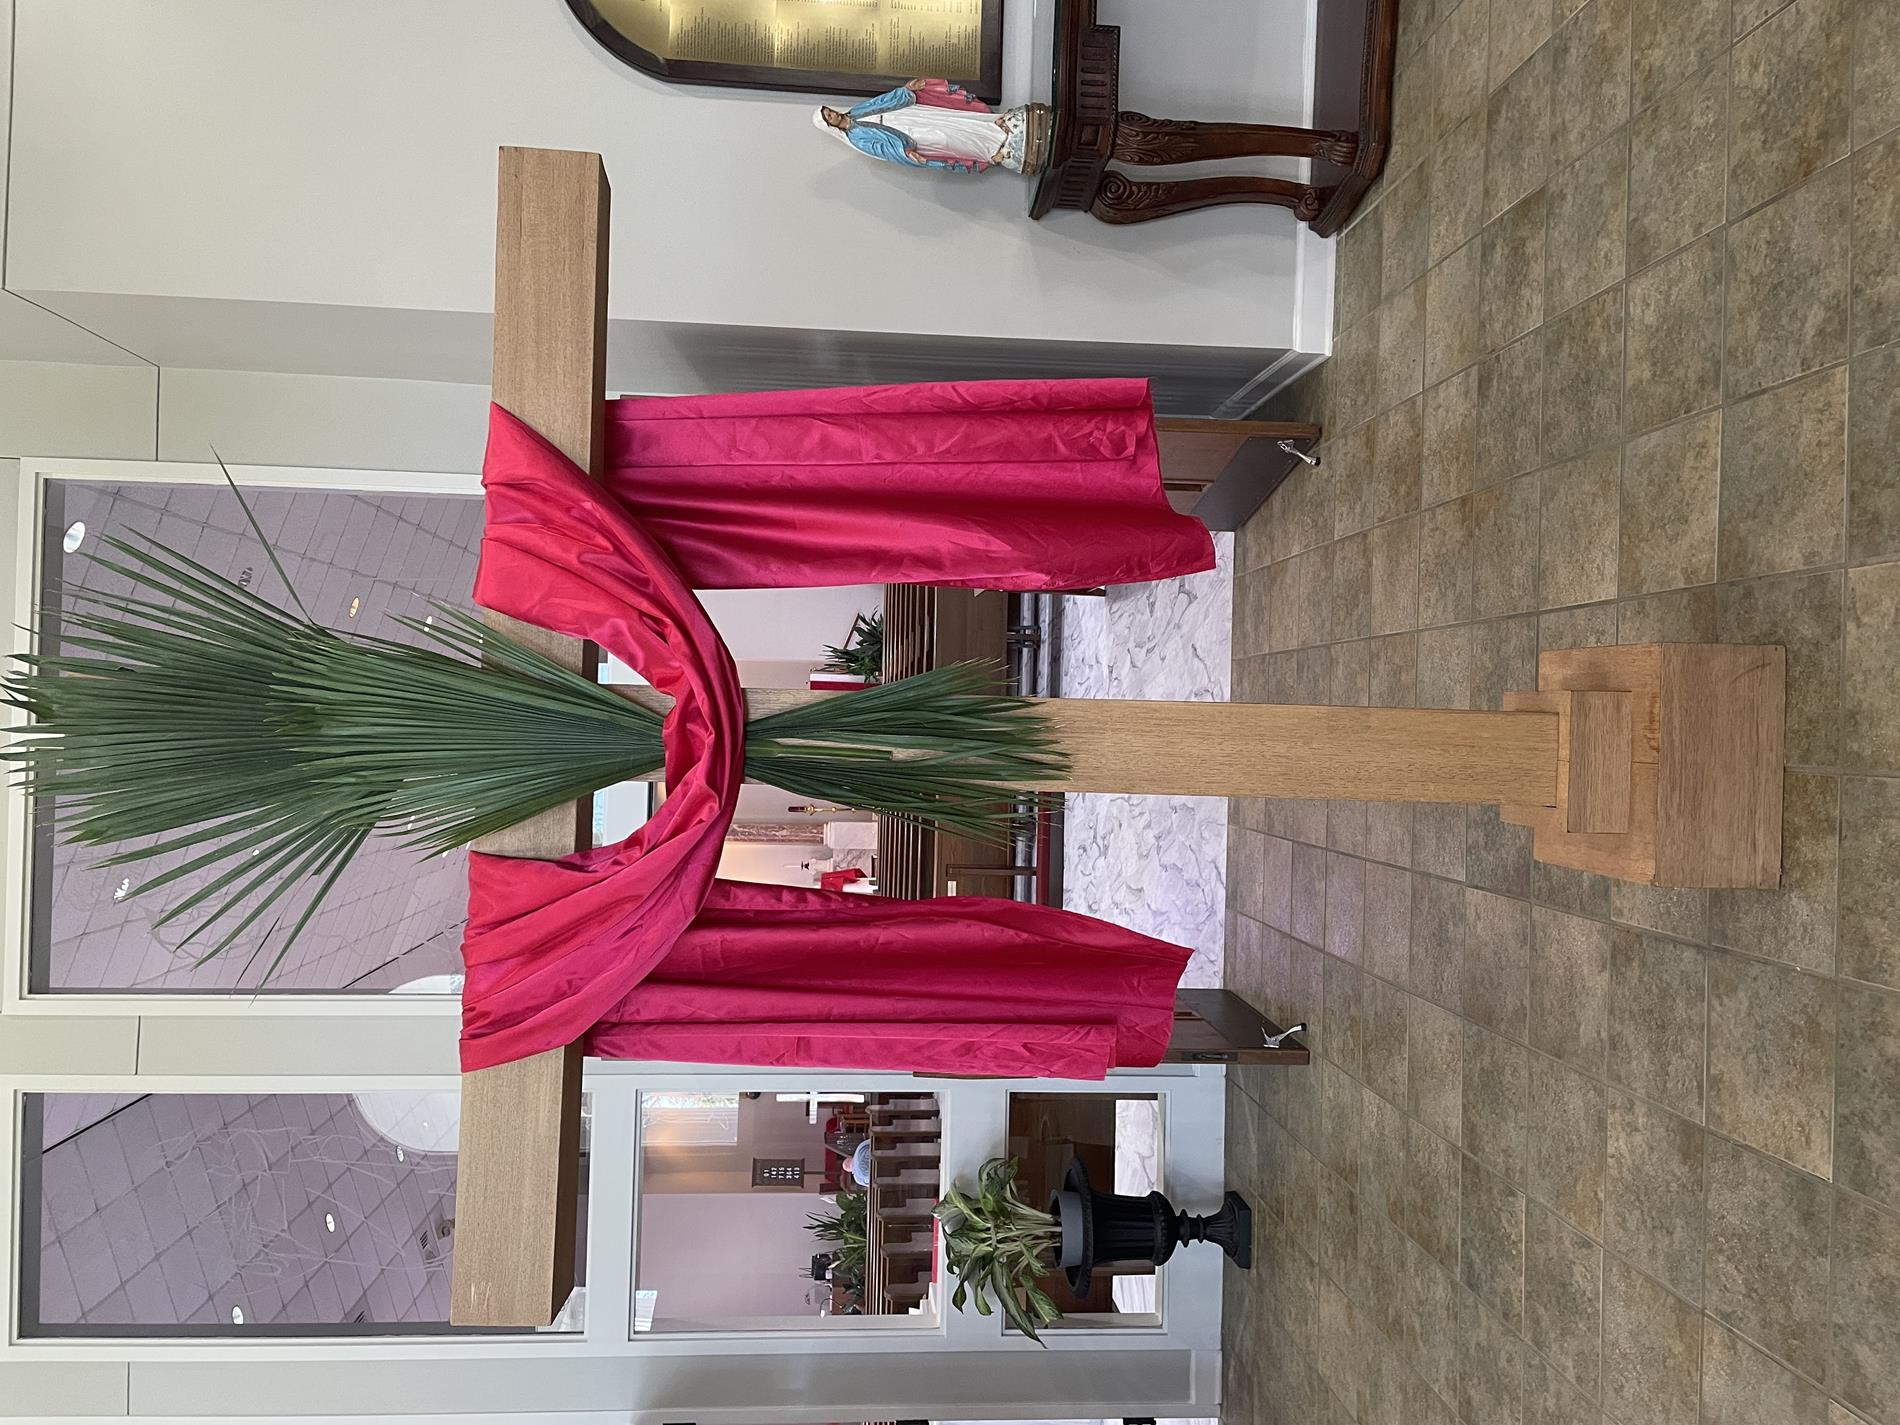 Ready for Palm Sunday